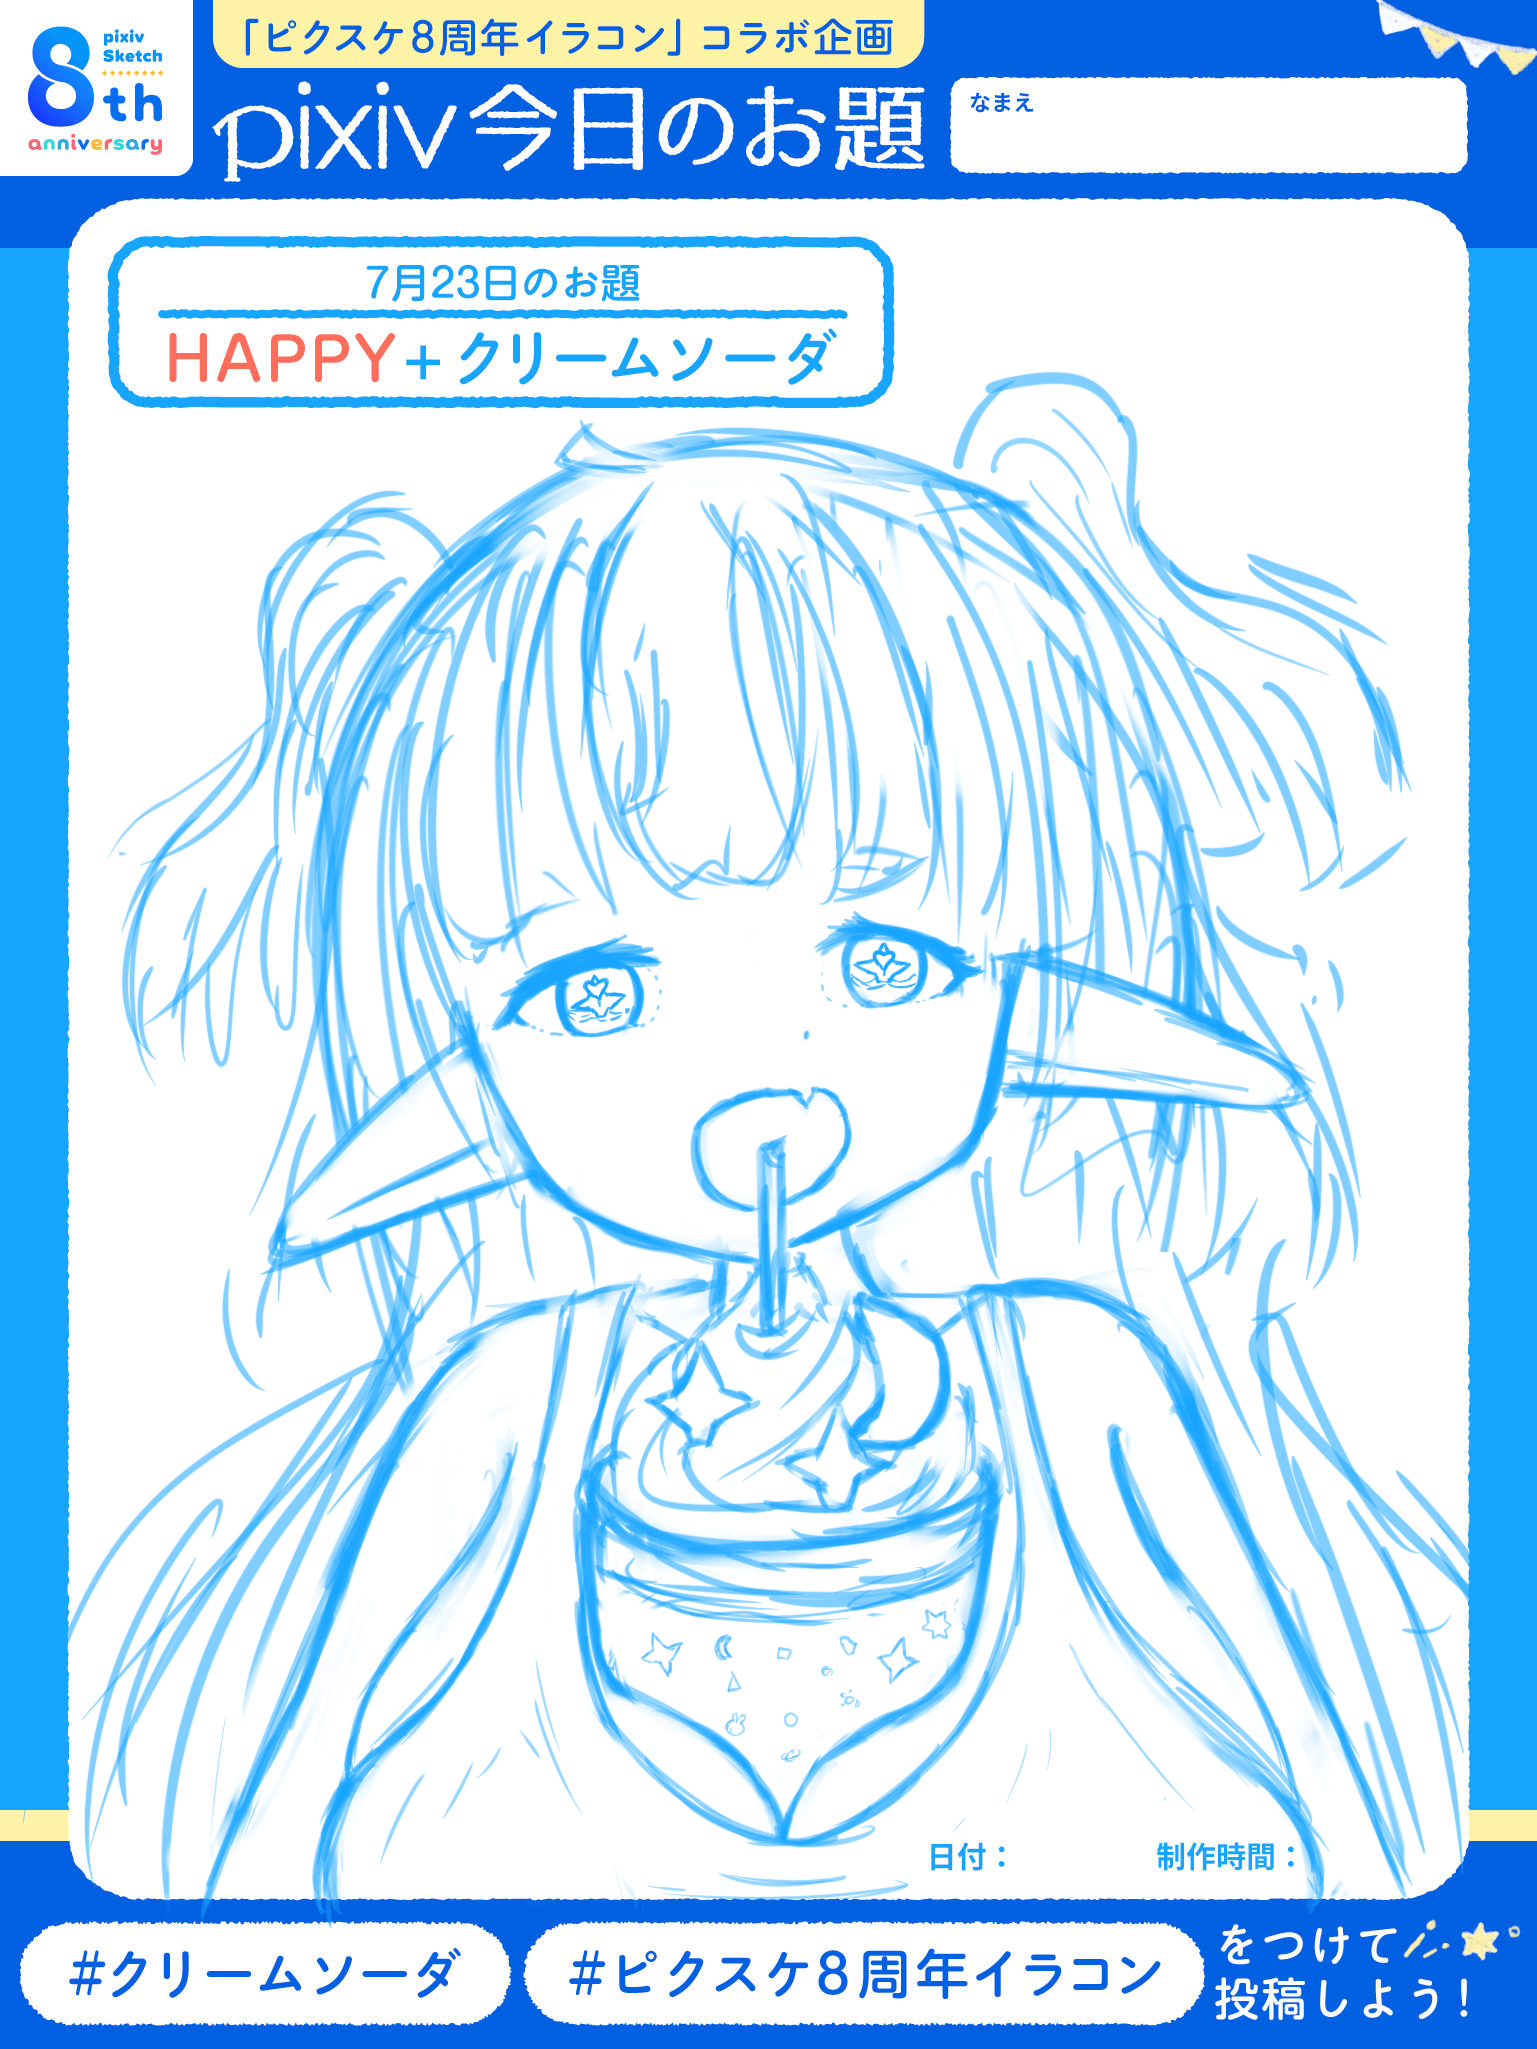 A pixiv sketch of me drinking some cream soda!